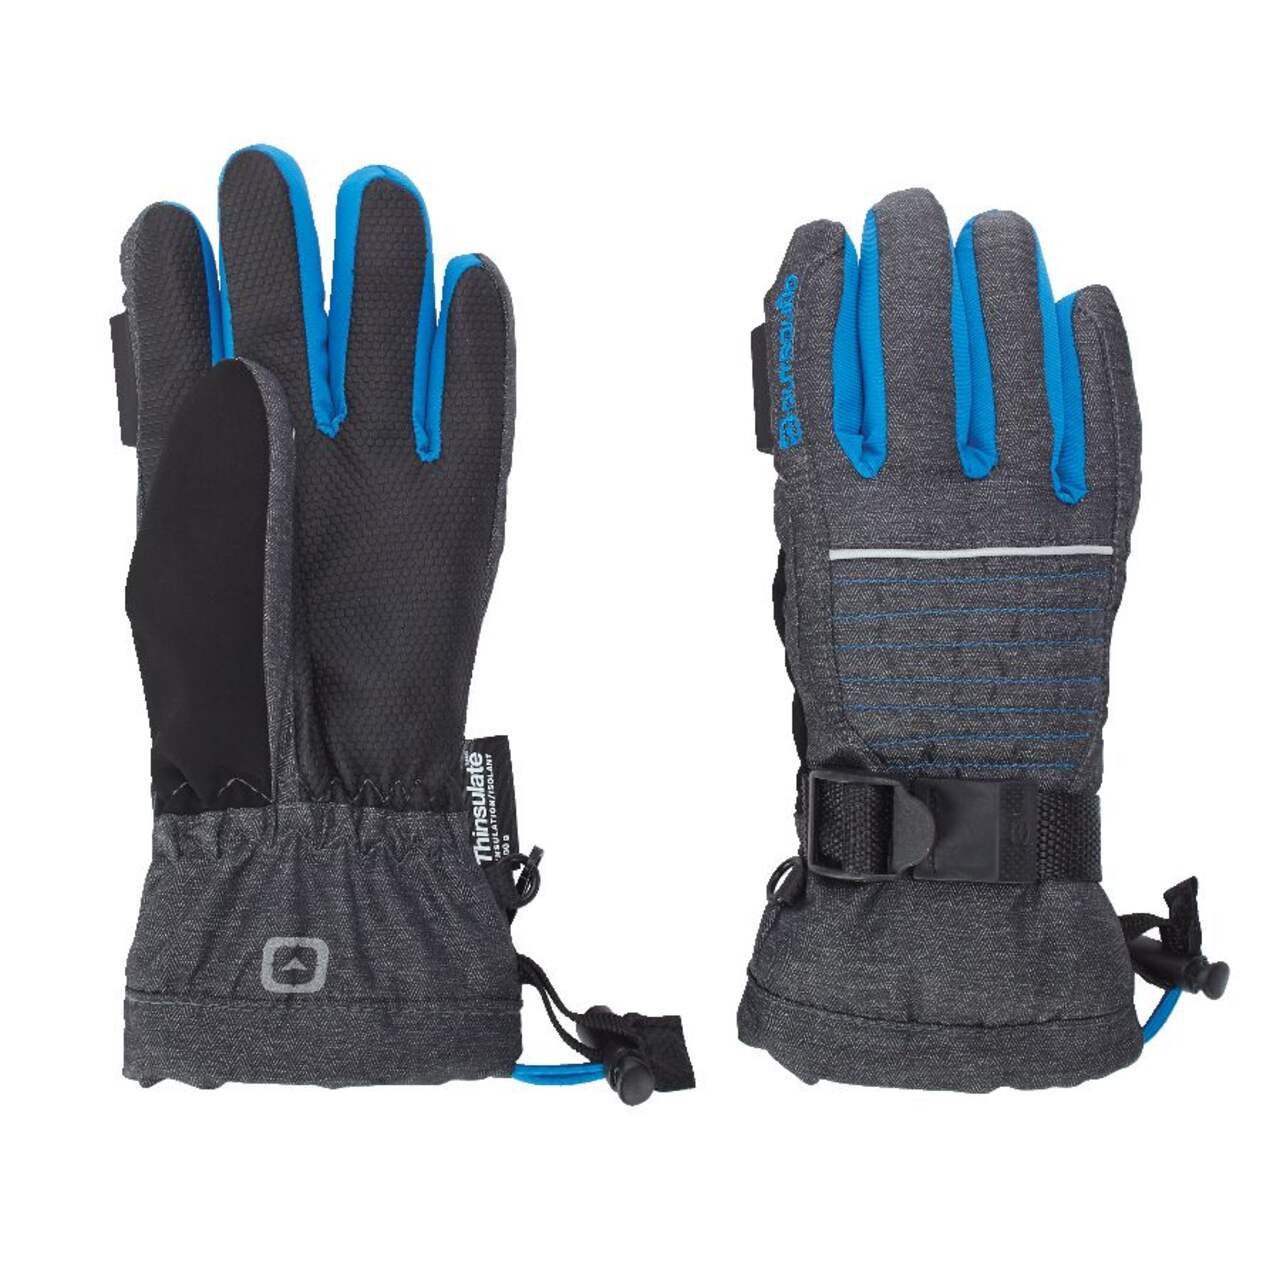 Outbound Boys Thermal Insulated Kids Winter Ski Snowboard Gloves